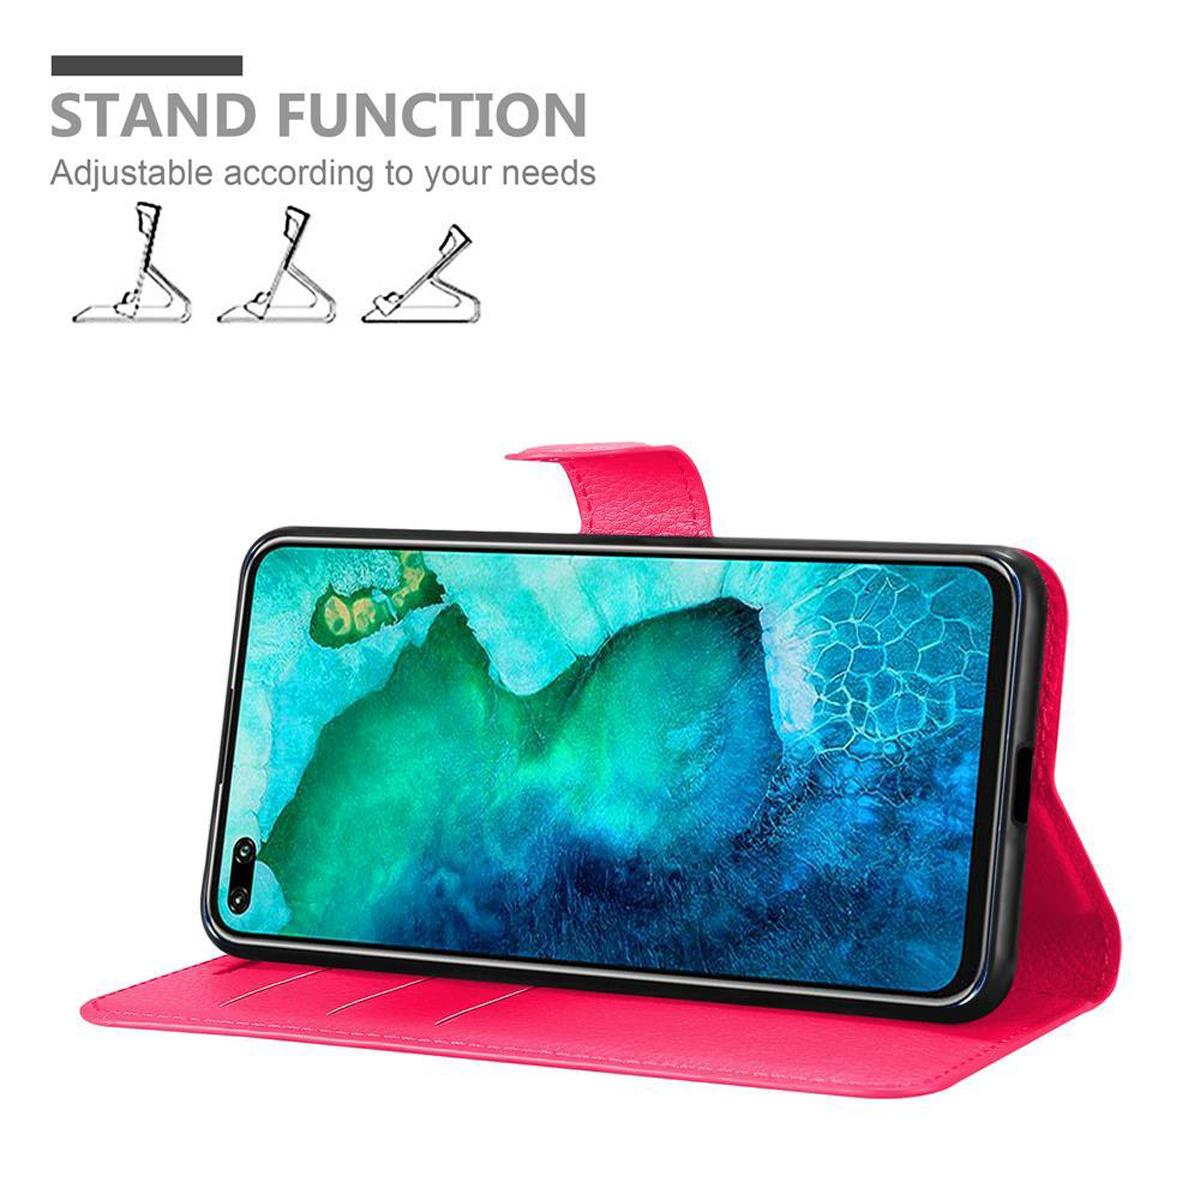 Standfunktion, Hülle PRO, CHERRY Honor, CADORABO PINK View Book 30 Bookcover,